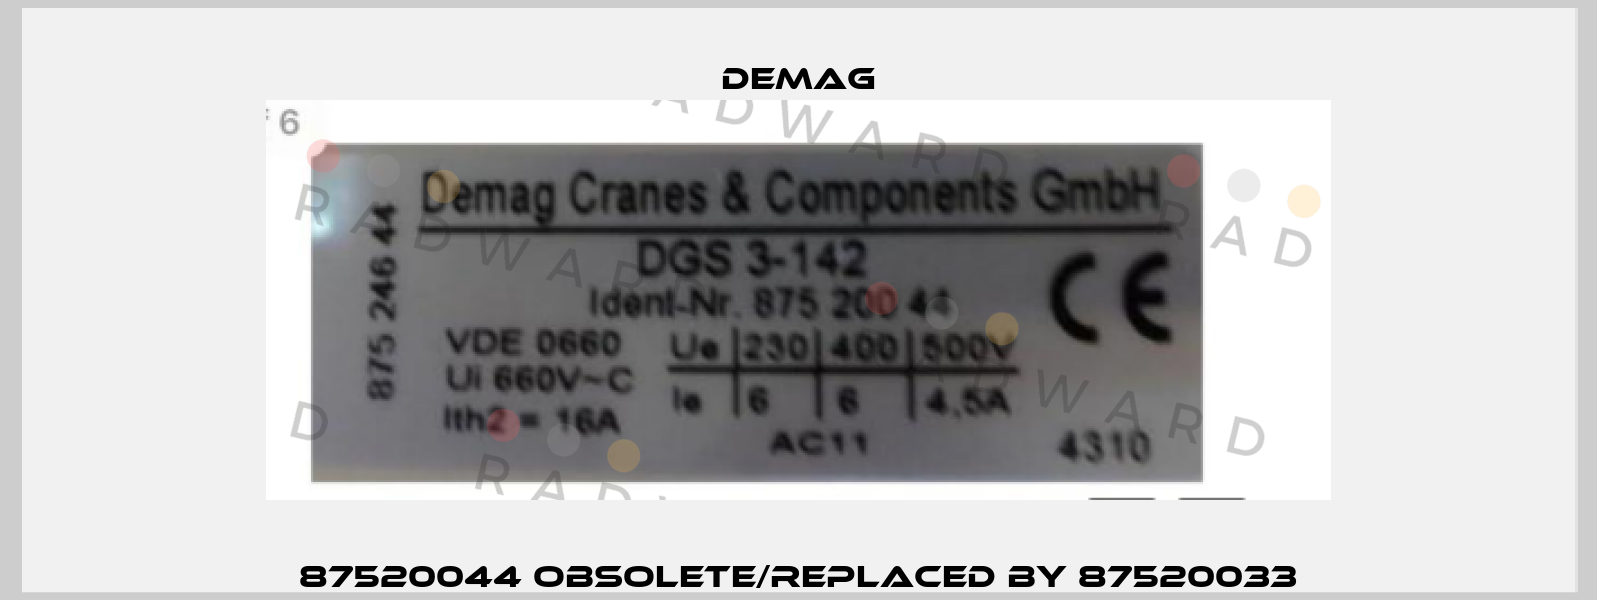 87520044 obsolete/replaced by 87520033 Demag